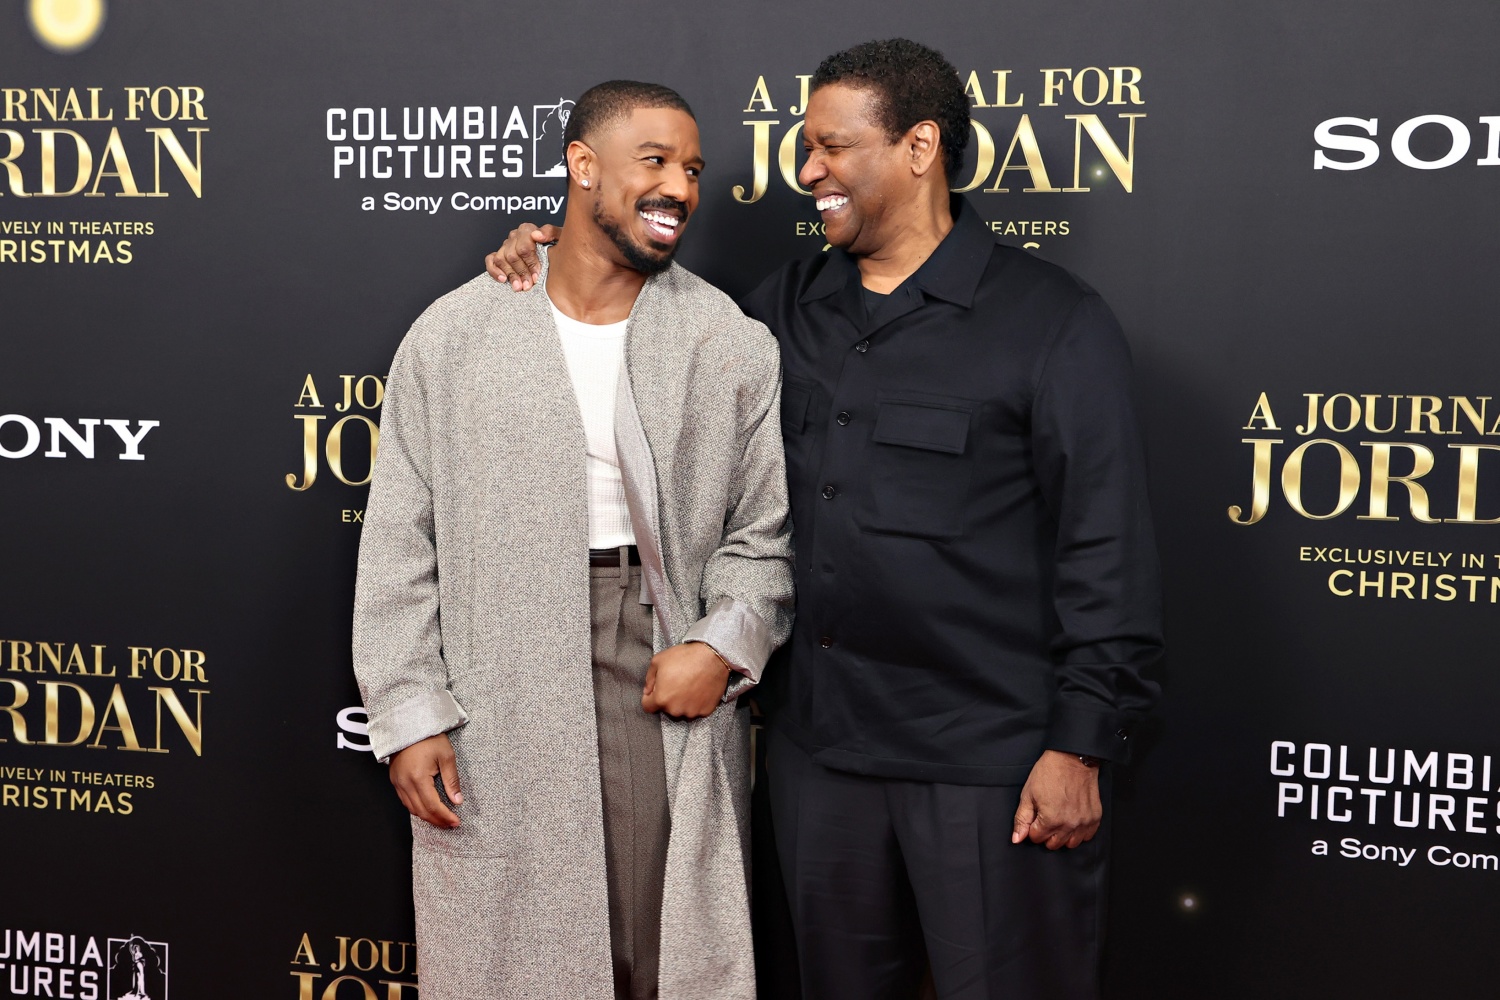 Michael B. Jordan (L) and Denzel Washington attend the "A Journal For Jordan" World Premiere at AMC Lincoln Square Theater on December 09, 2021 in New York City. 